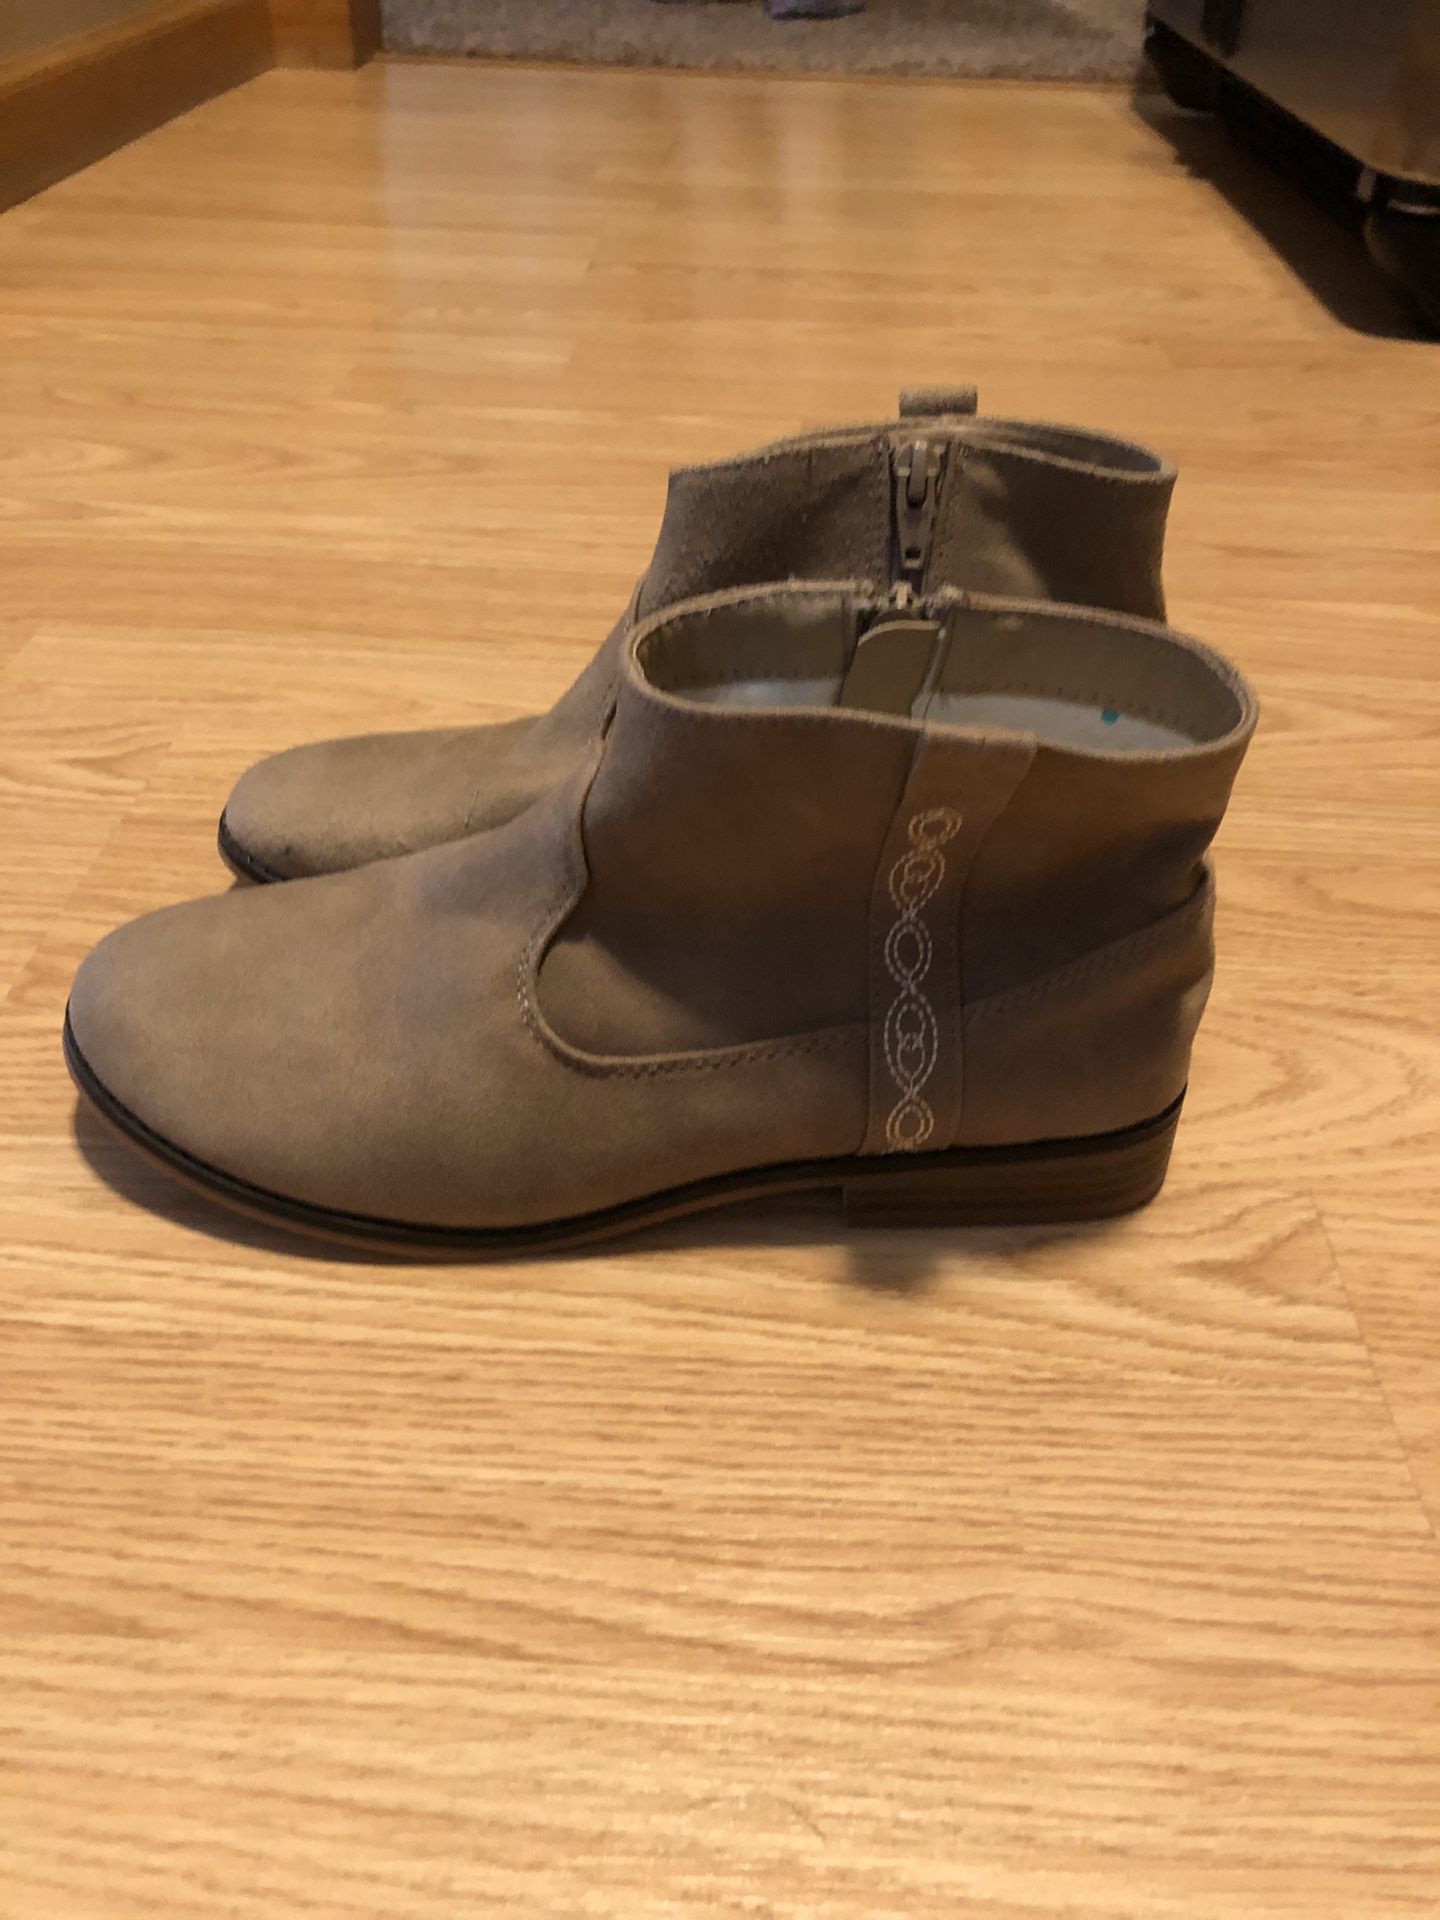 Girl’s New Tan Suede Boots Size 5